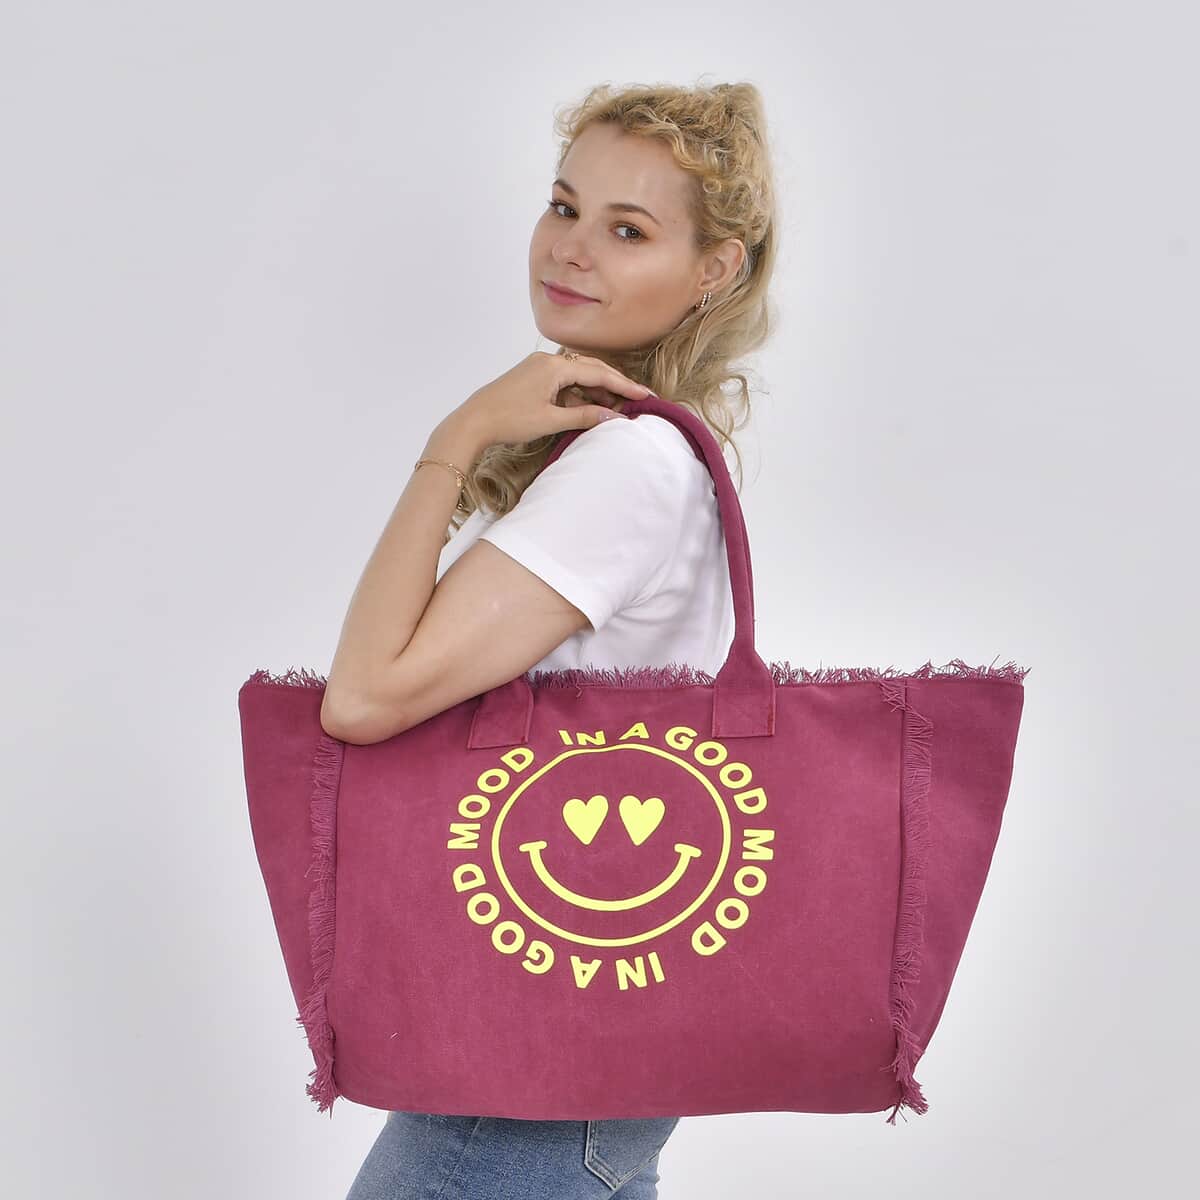 Navy Collection Wine Red Color Smiling Face with Heart-Eyes Printed Tote Bag (17.7"x7.9"x13.4") image number 1